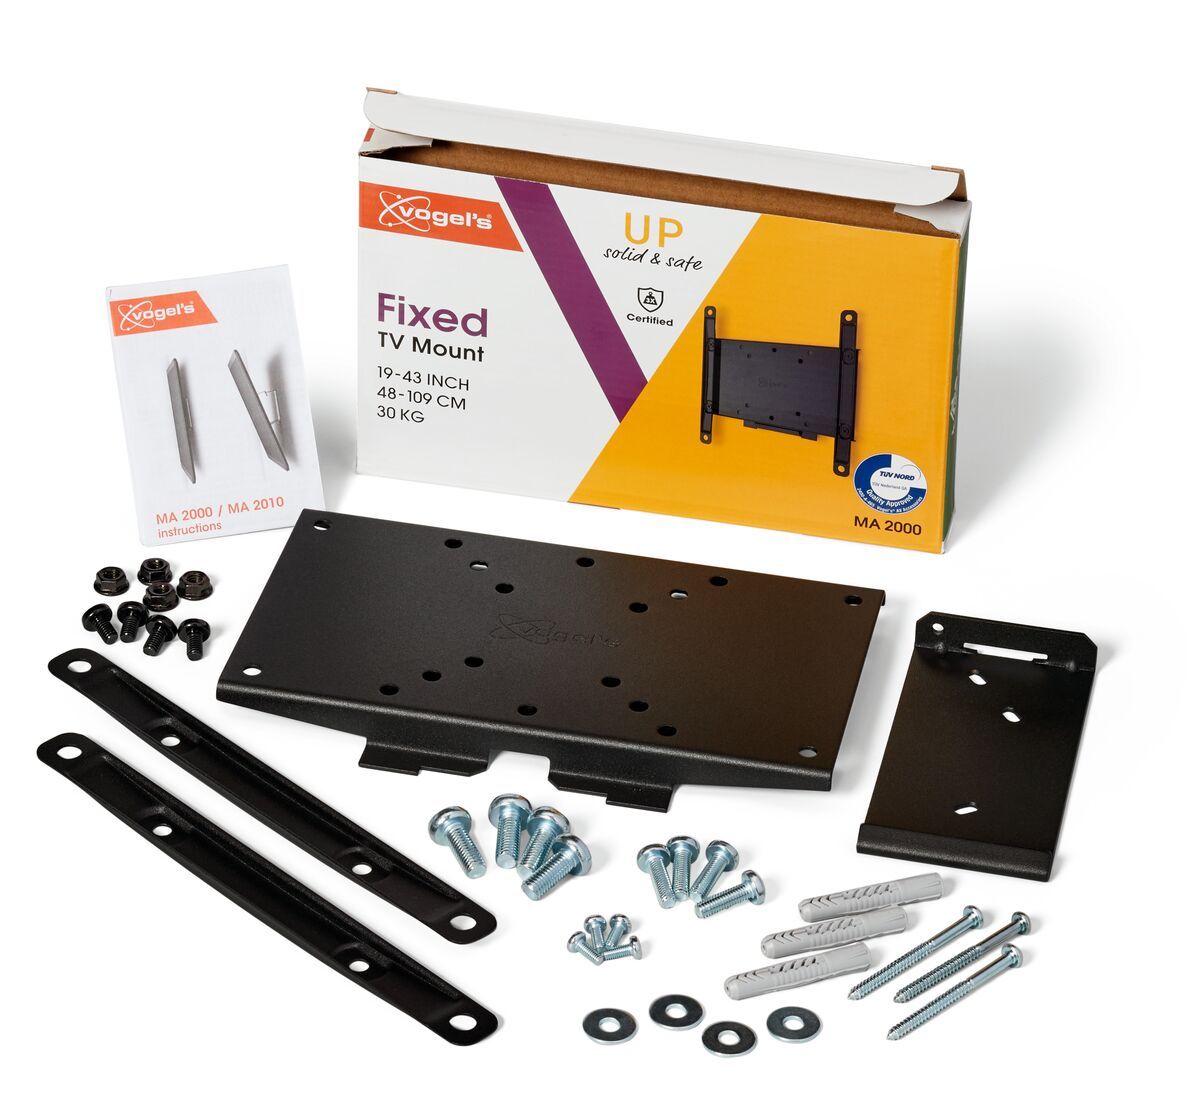 Vogel's MA2000 Fixed TV Wall Mount - Suitable for 19 up to 43 inch TVs up to Unboxing